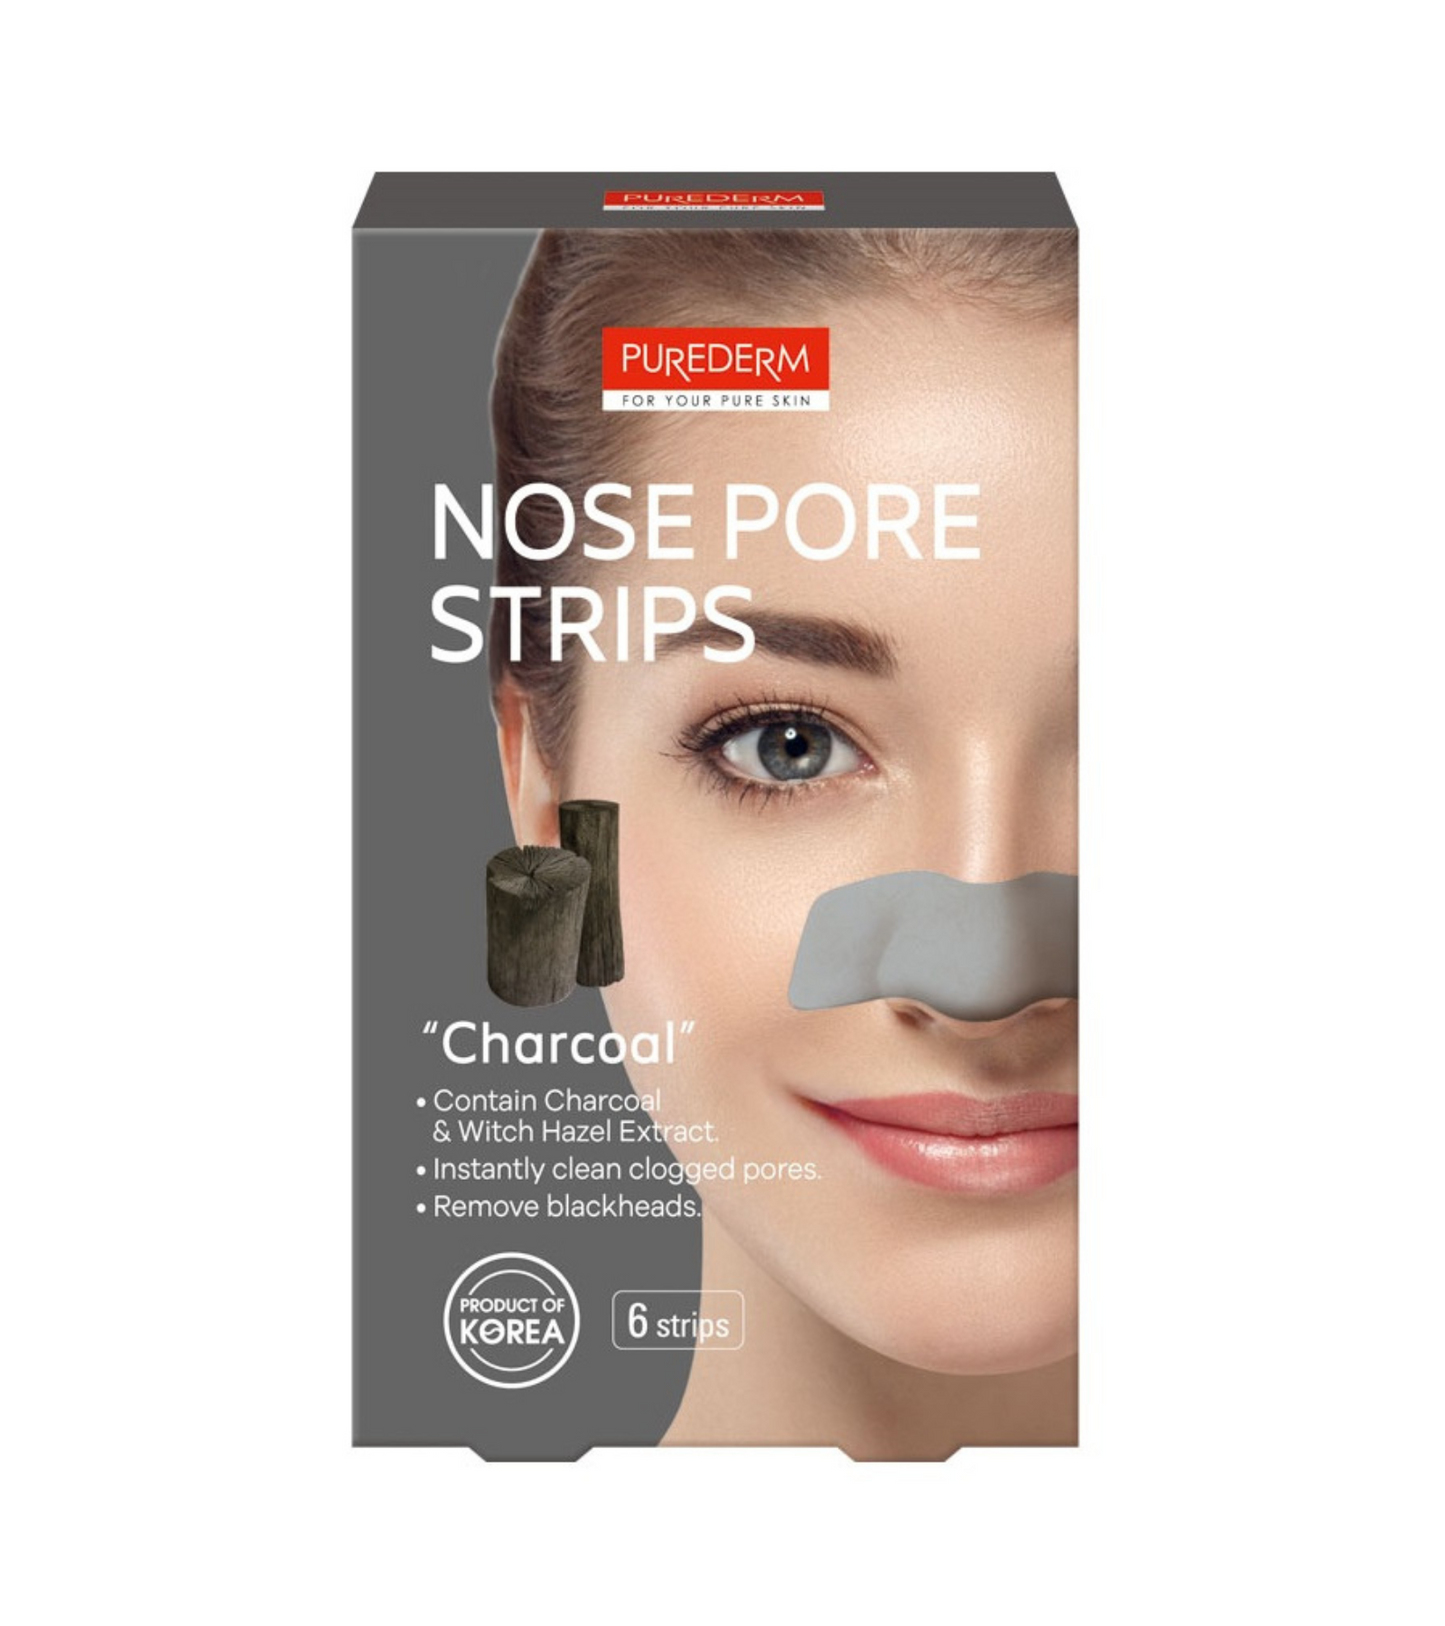 Nose Pore Strips "Charcoal"